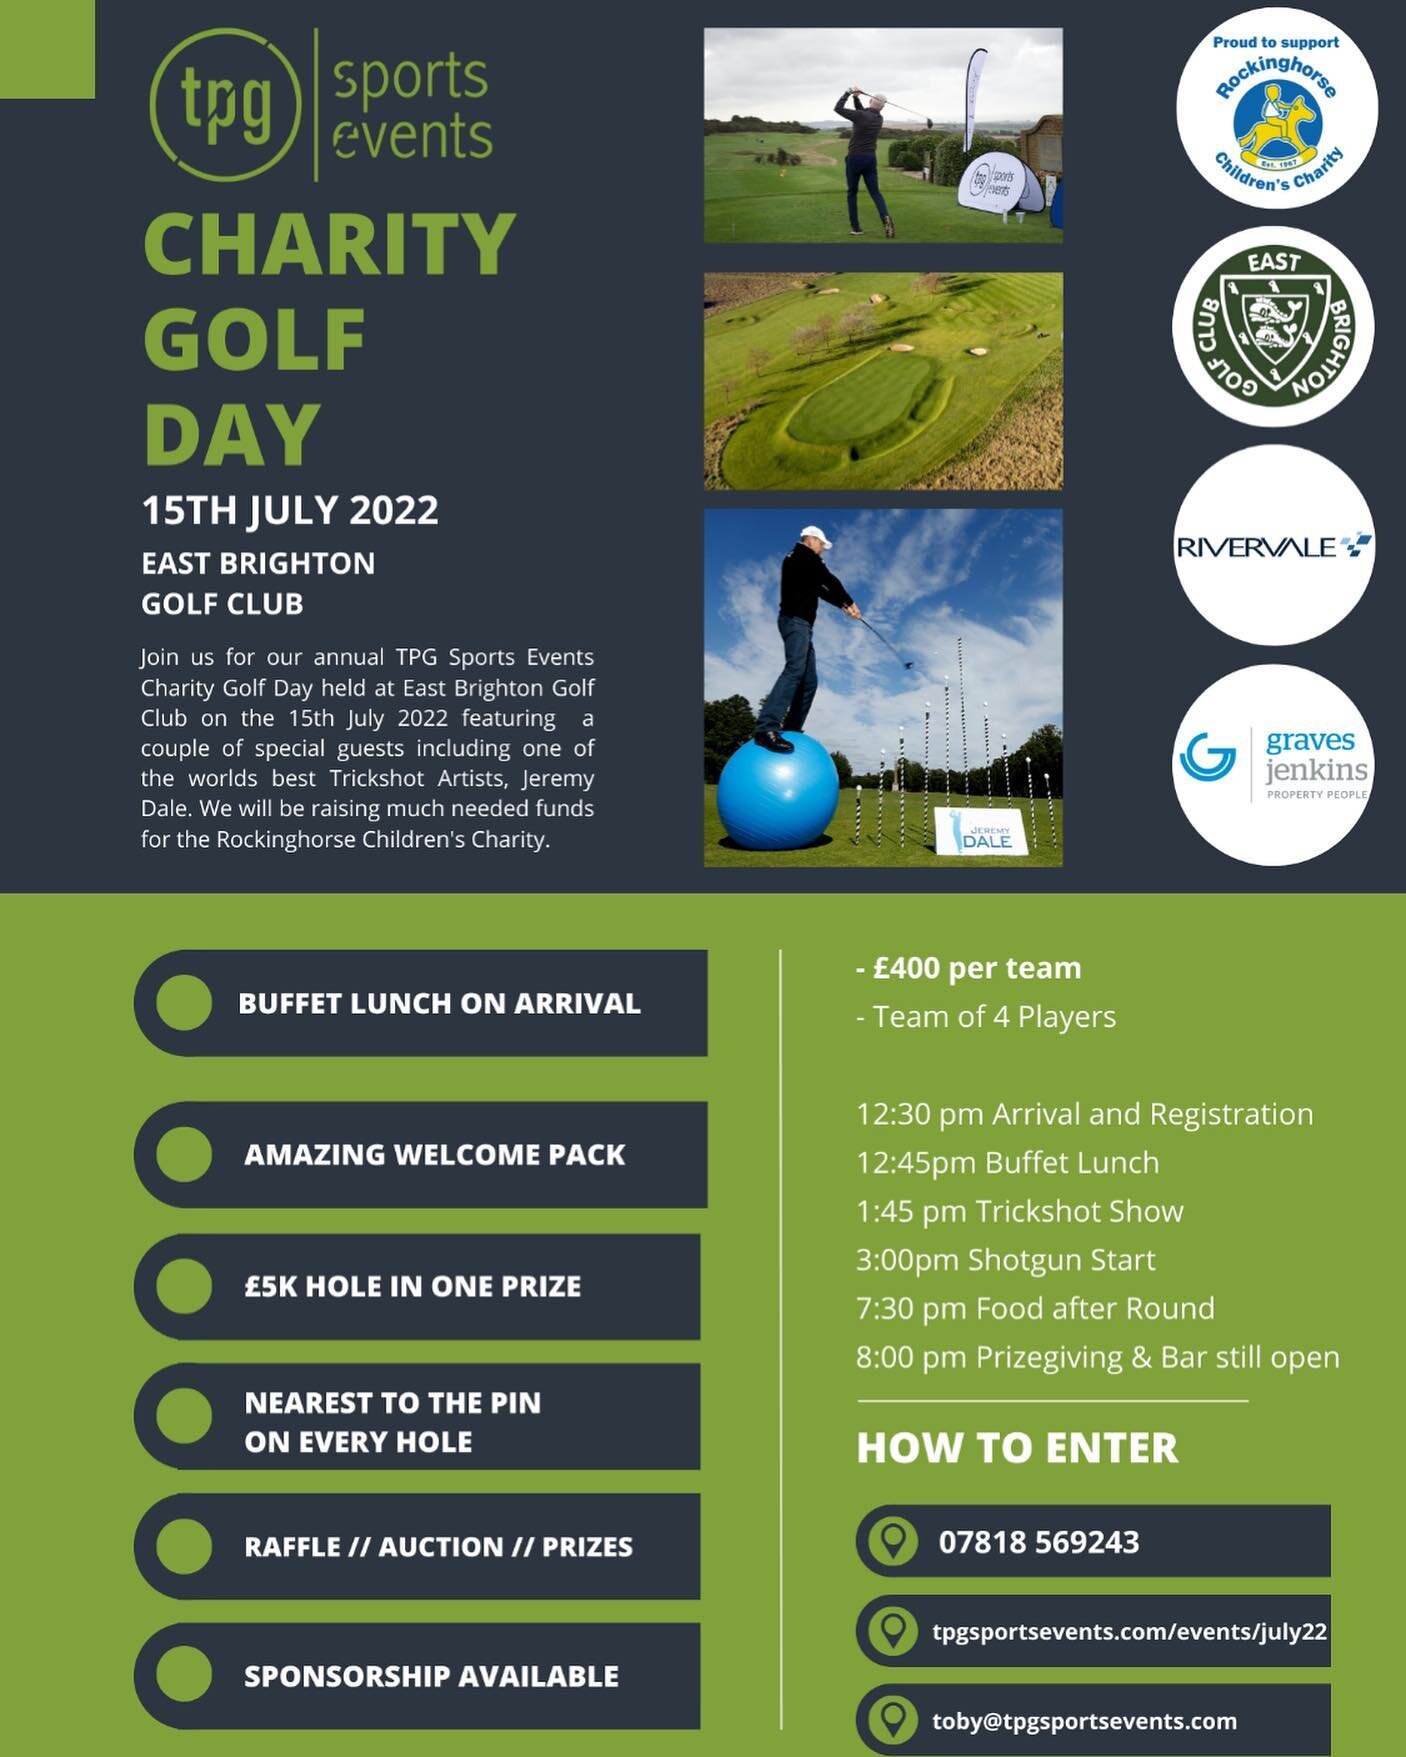 GOLF DAY NEXT WEEK👊🏼

With only 3 teams left for the golf day. Please let us know if you want to enter a team!  The best golf day in Sussex with amazing prizes, world famous trick shot artist and raising funds for a wonderful charity in Rockinghors